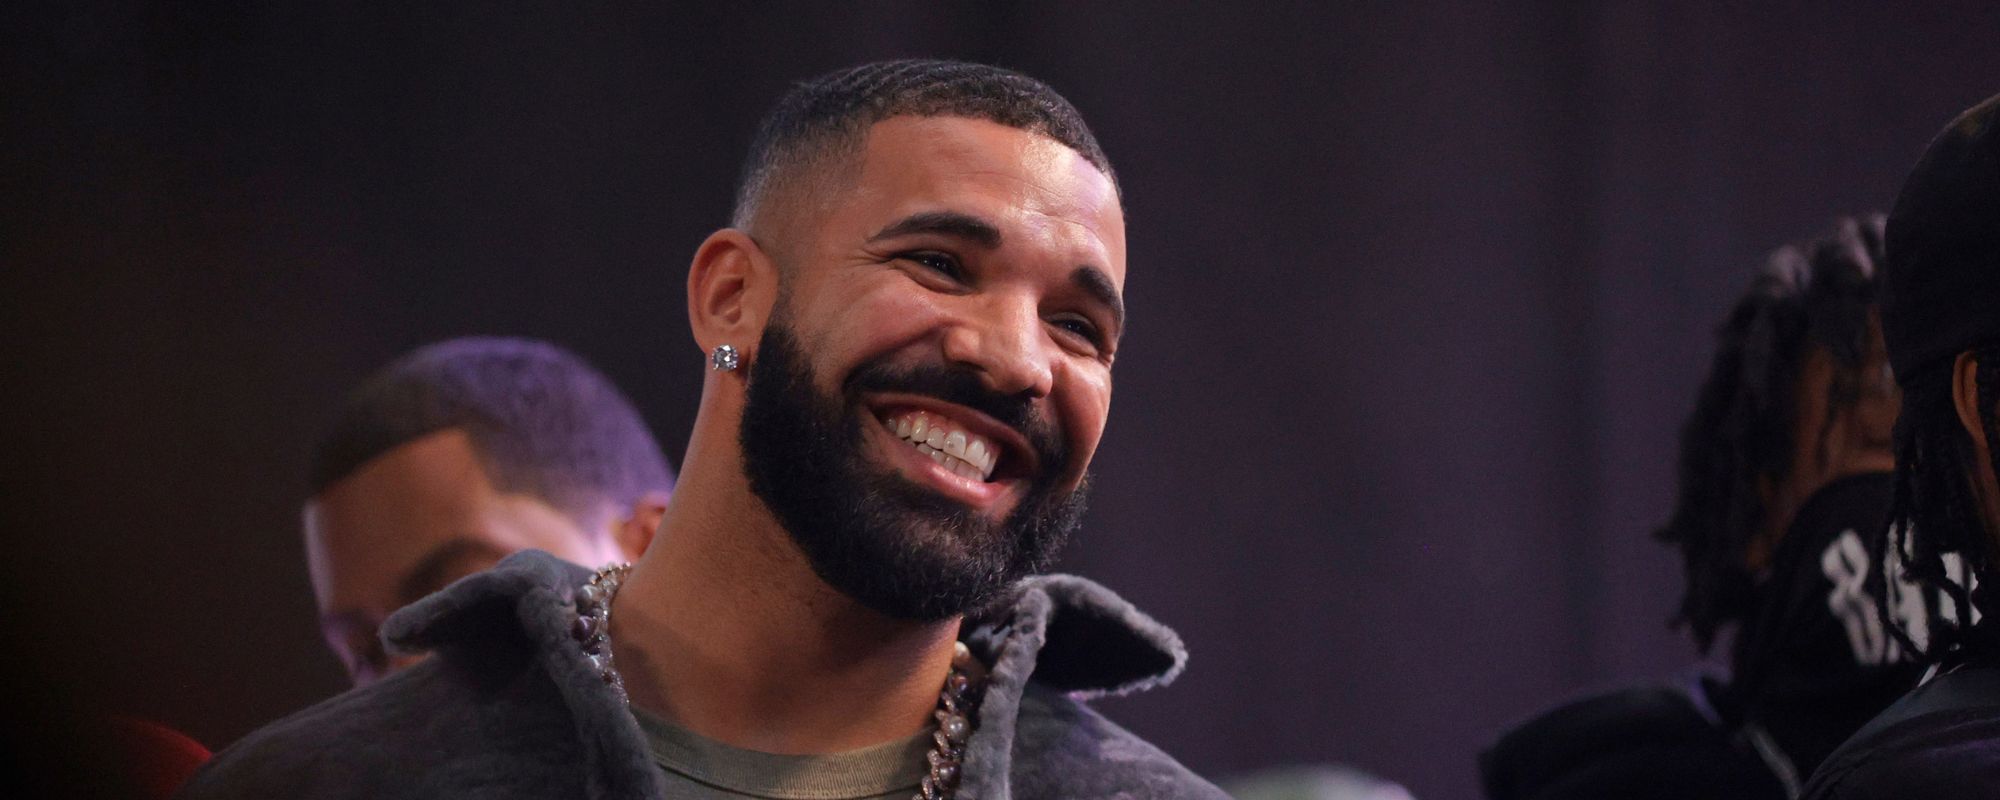 Drake smiles onstage during an October 2021 event in Long Beach, California.